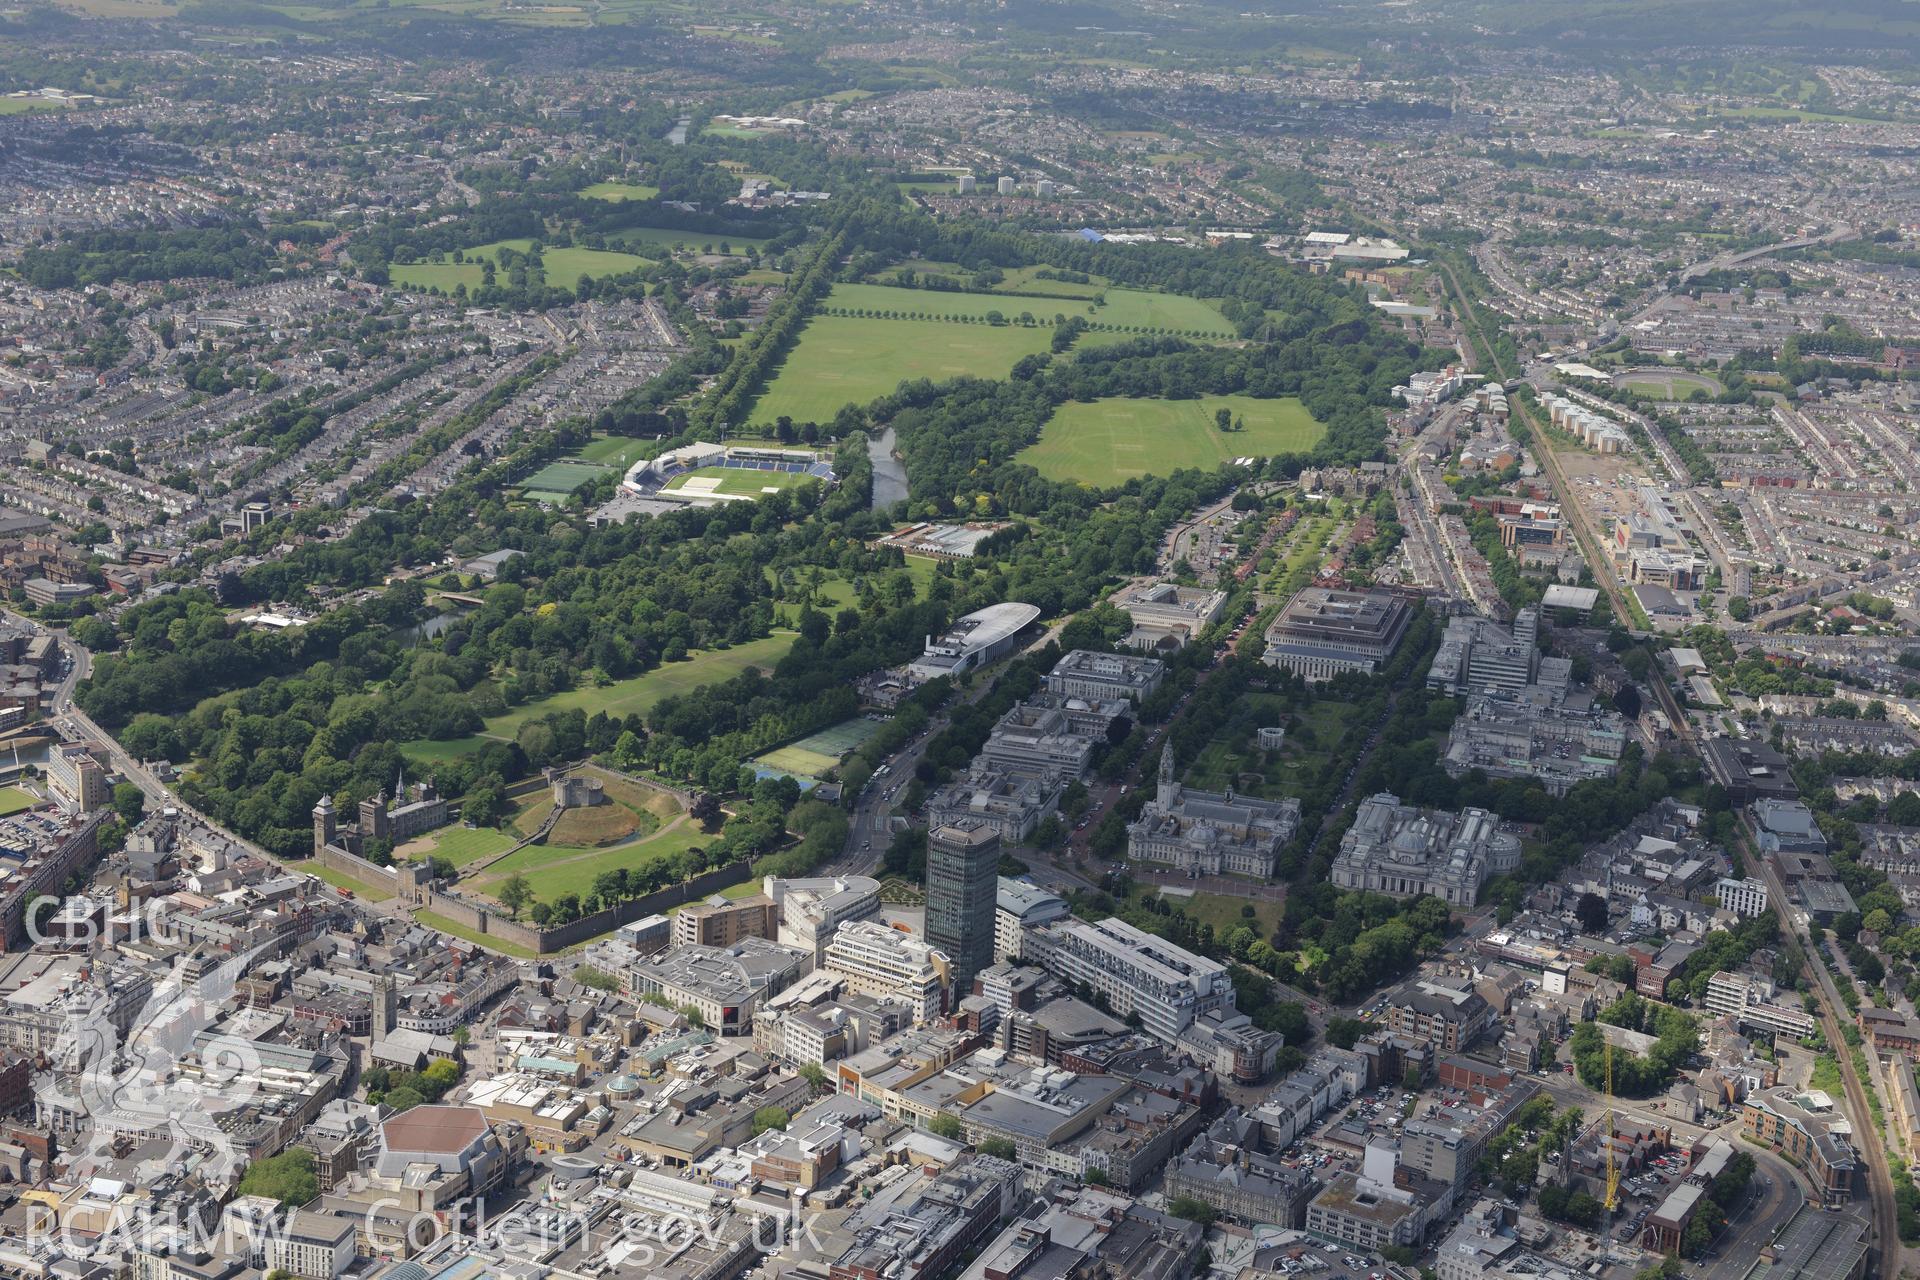 Cardiff Castle; National Museum, City Hall, Sophia Gardens cricket grounds and Pontcanna fields, Cardiff. Oblique aerial photograph taken during the Royal Commission's programme of archaeological aerial reconnaissance by Toby Driver on 29th June 2015.